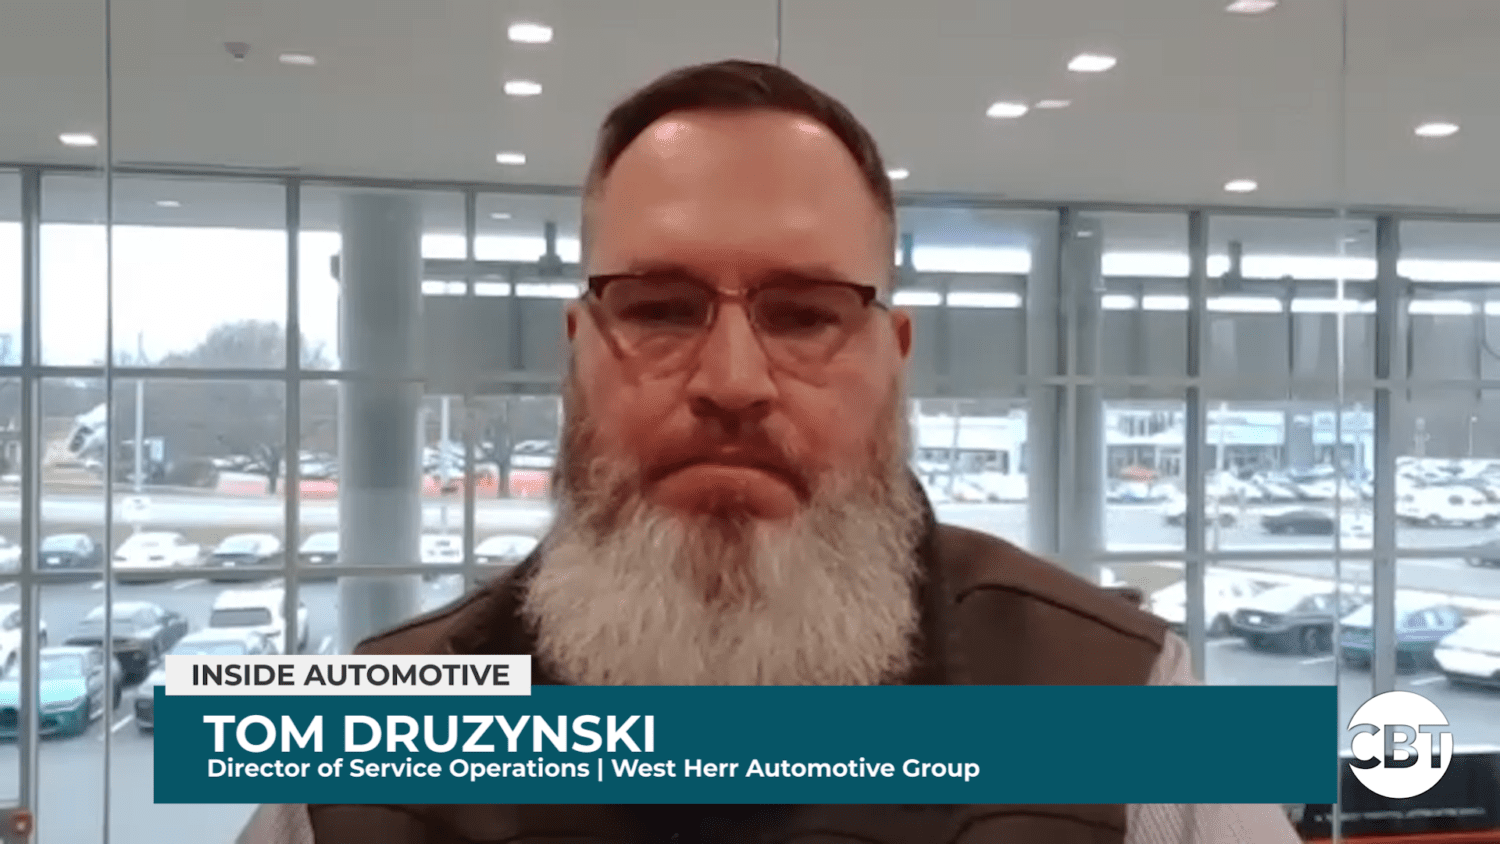 Tom Druzynski joins Inside Automotive to share tips and strategies for improving efficiency in dealership service operations.